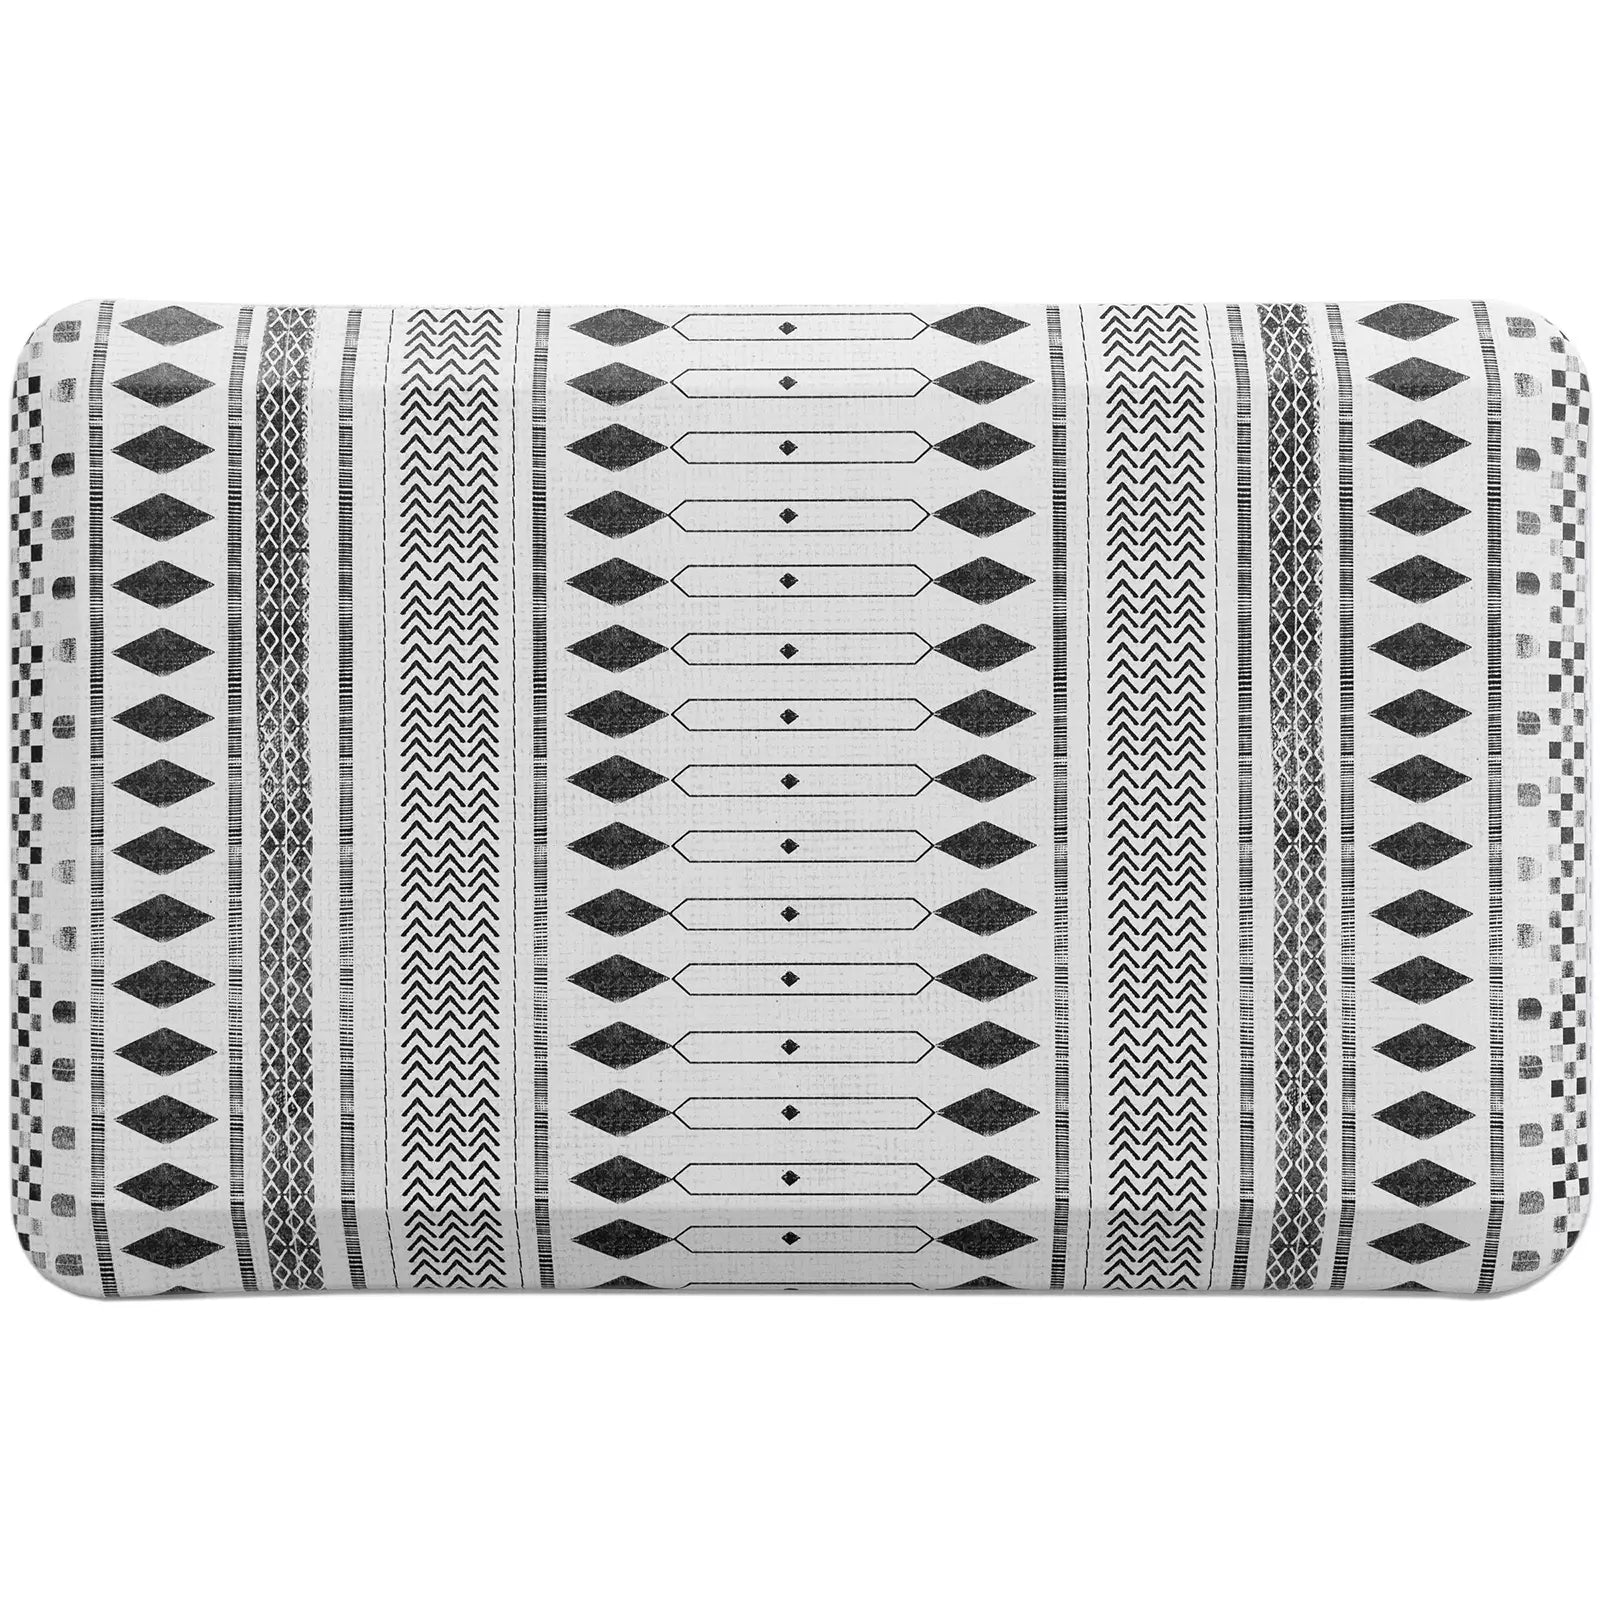 Nordique Slate Black and White Boho Nordic Print Standing Mat in size 20x32